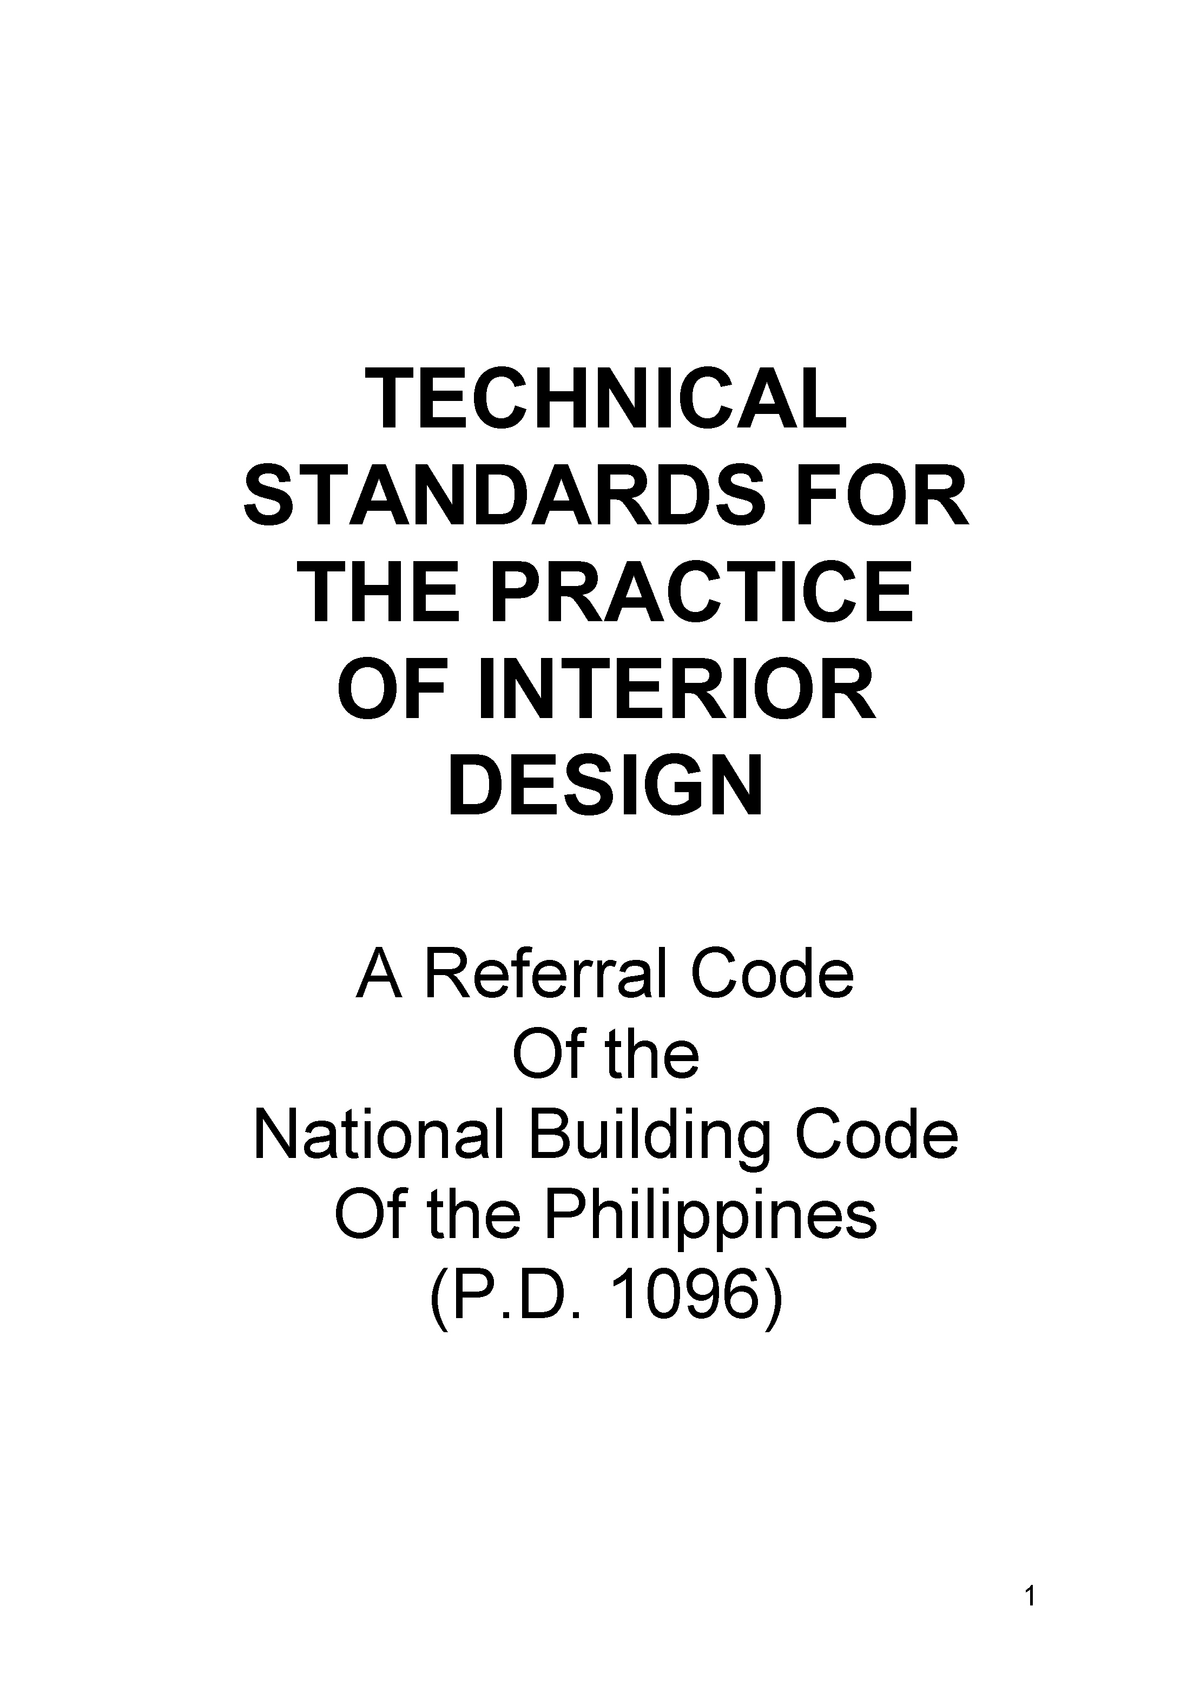 interior-design-code-fettqd-technical-standards-for-the-practice-of